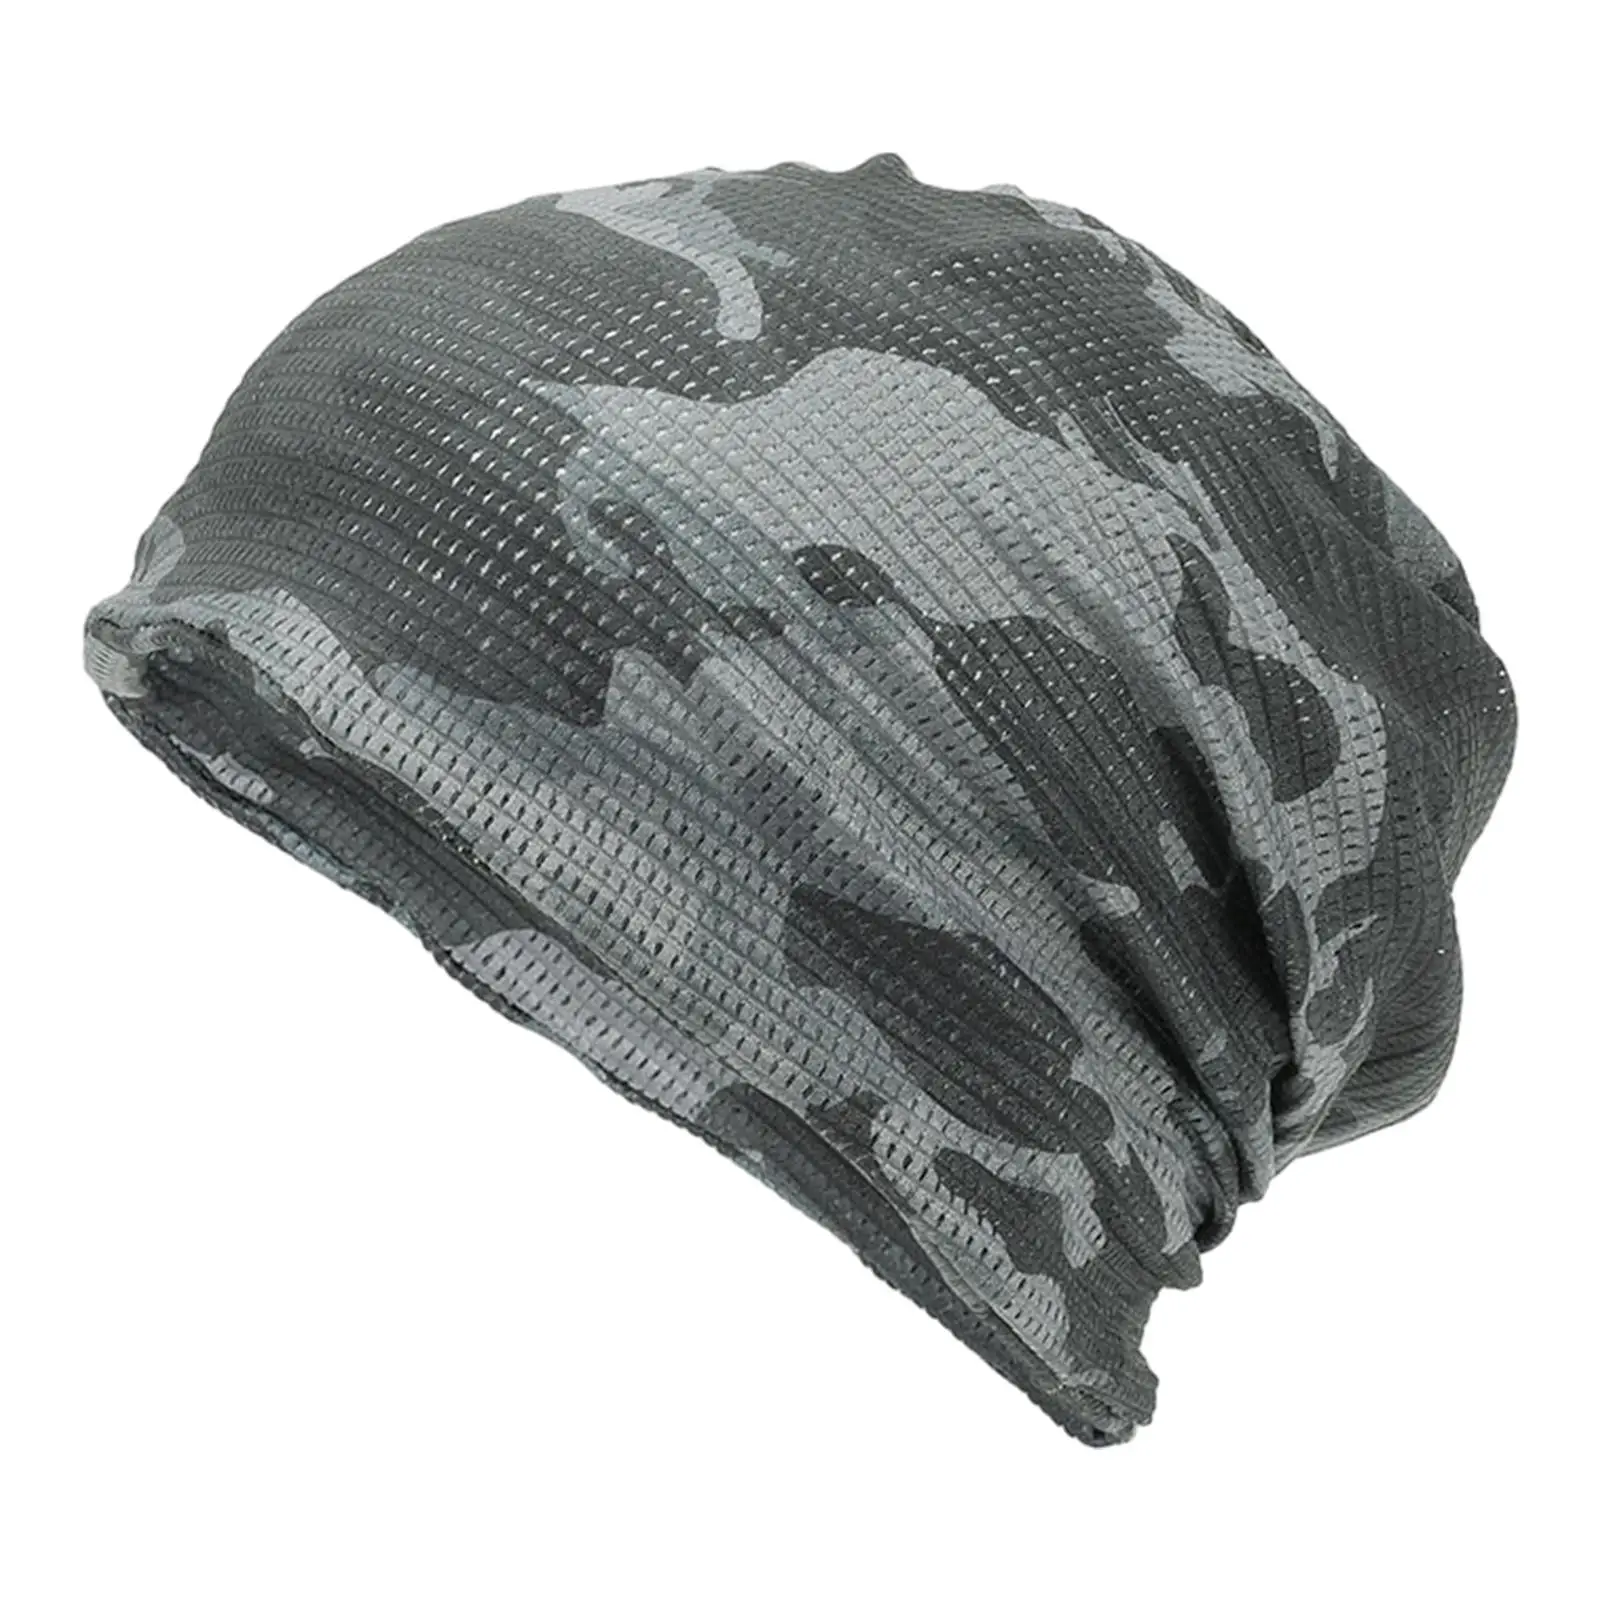 Beanie Caps Slouchy Beanie Summer Adults Breathable Comfortable Skull Hats